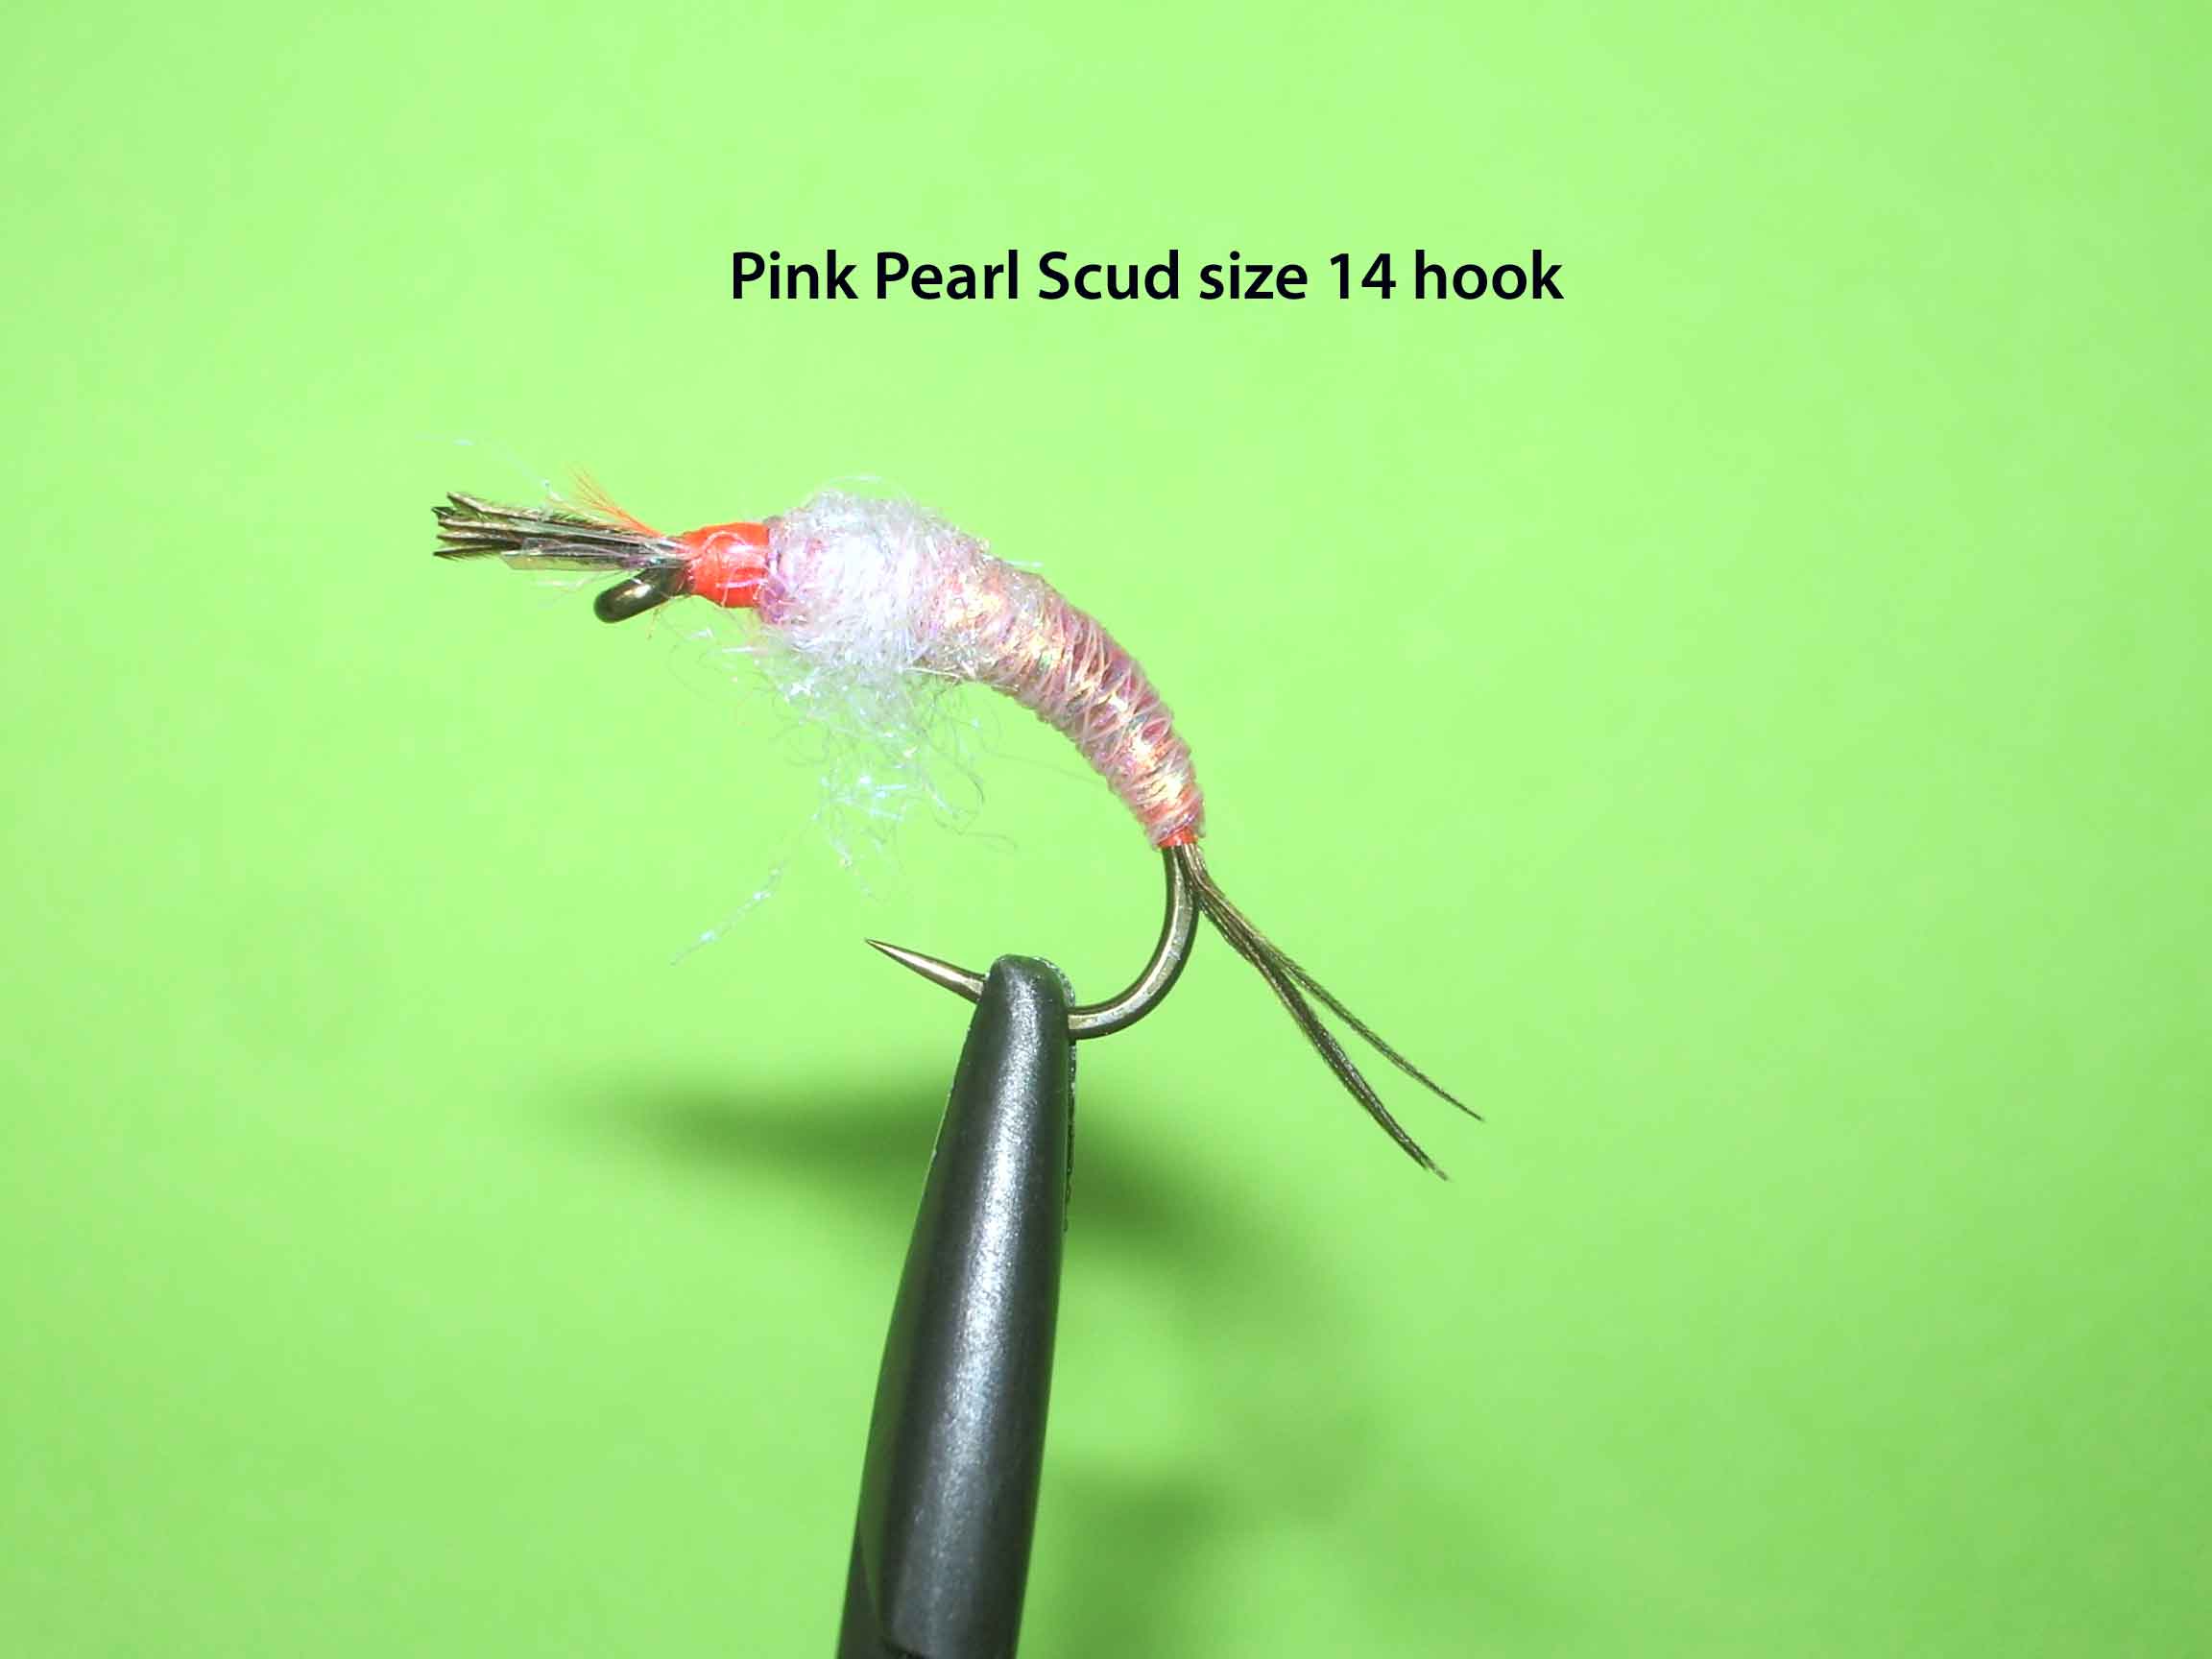 pink-pearl-scud-8882